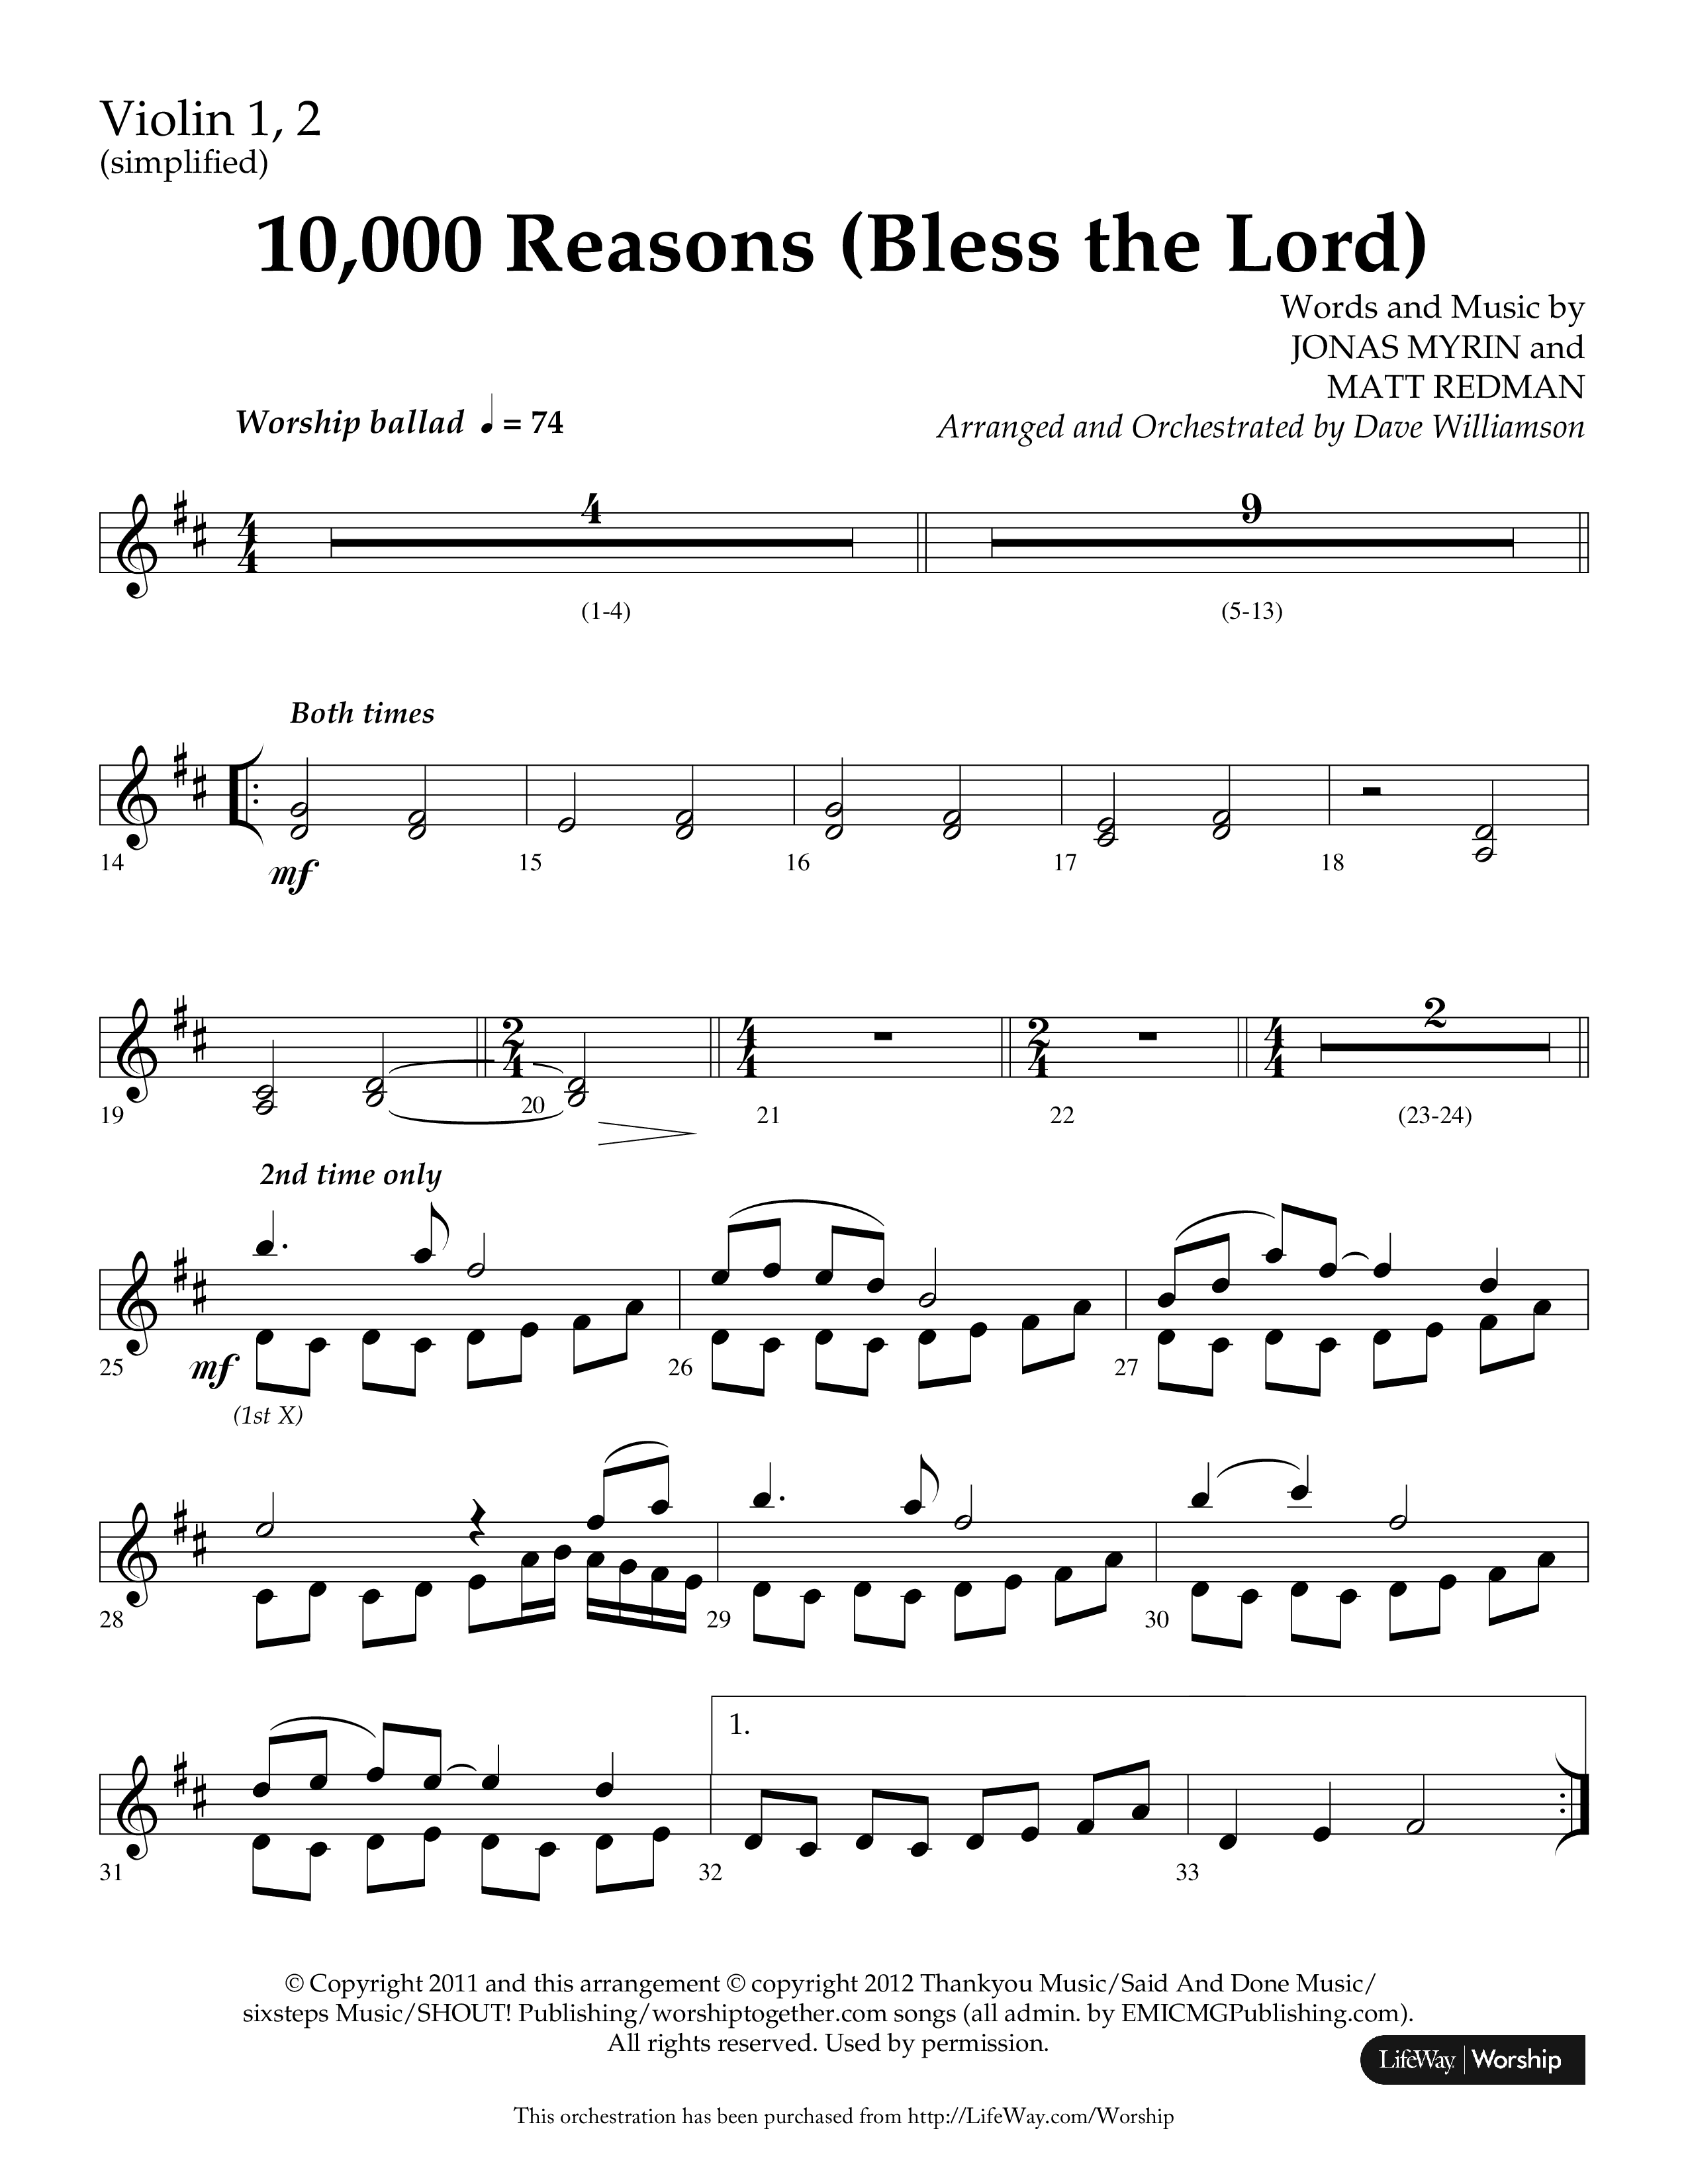 10,000 Reasons (Bless The Lord) (Choral Anthem SATB) Violin 1/2 (Lifeway Choral / Arr. Dave Williamson)